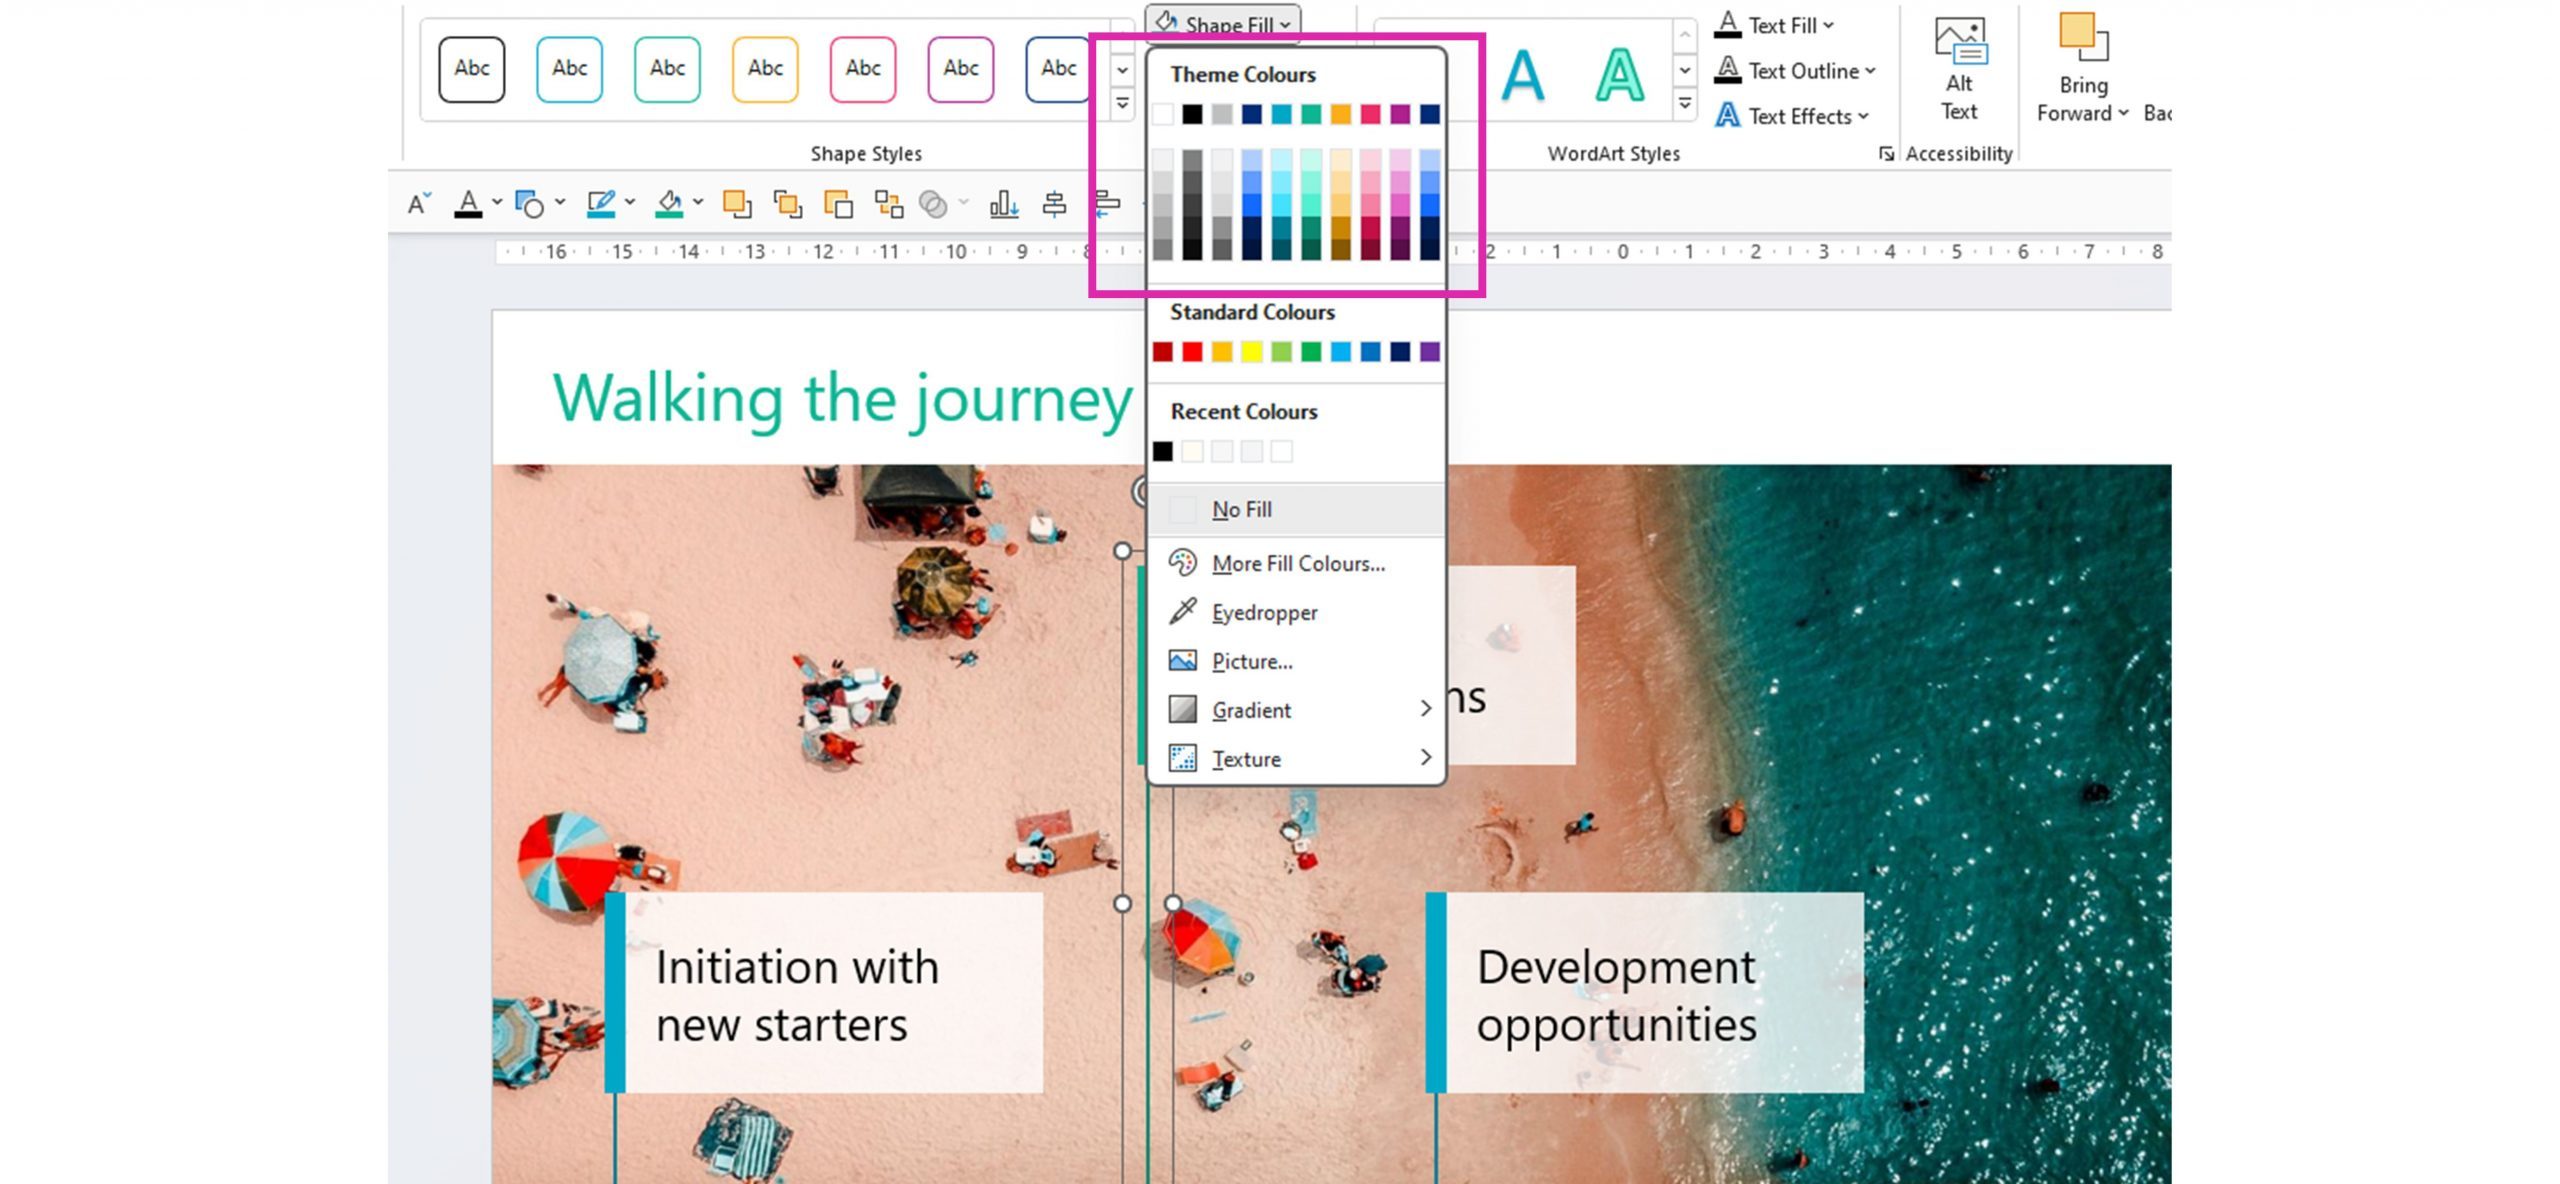 Screenshot, theme colours in PowerPoint